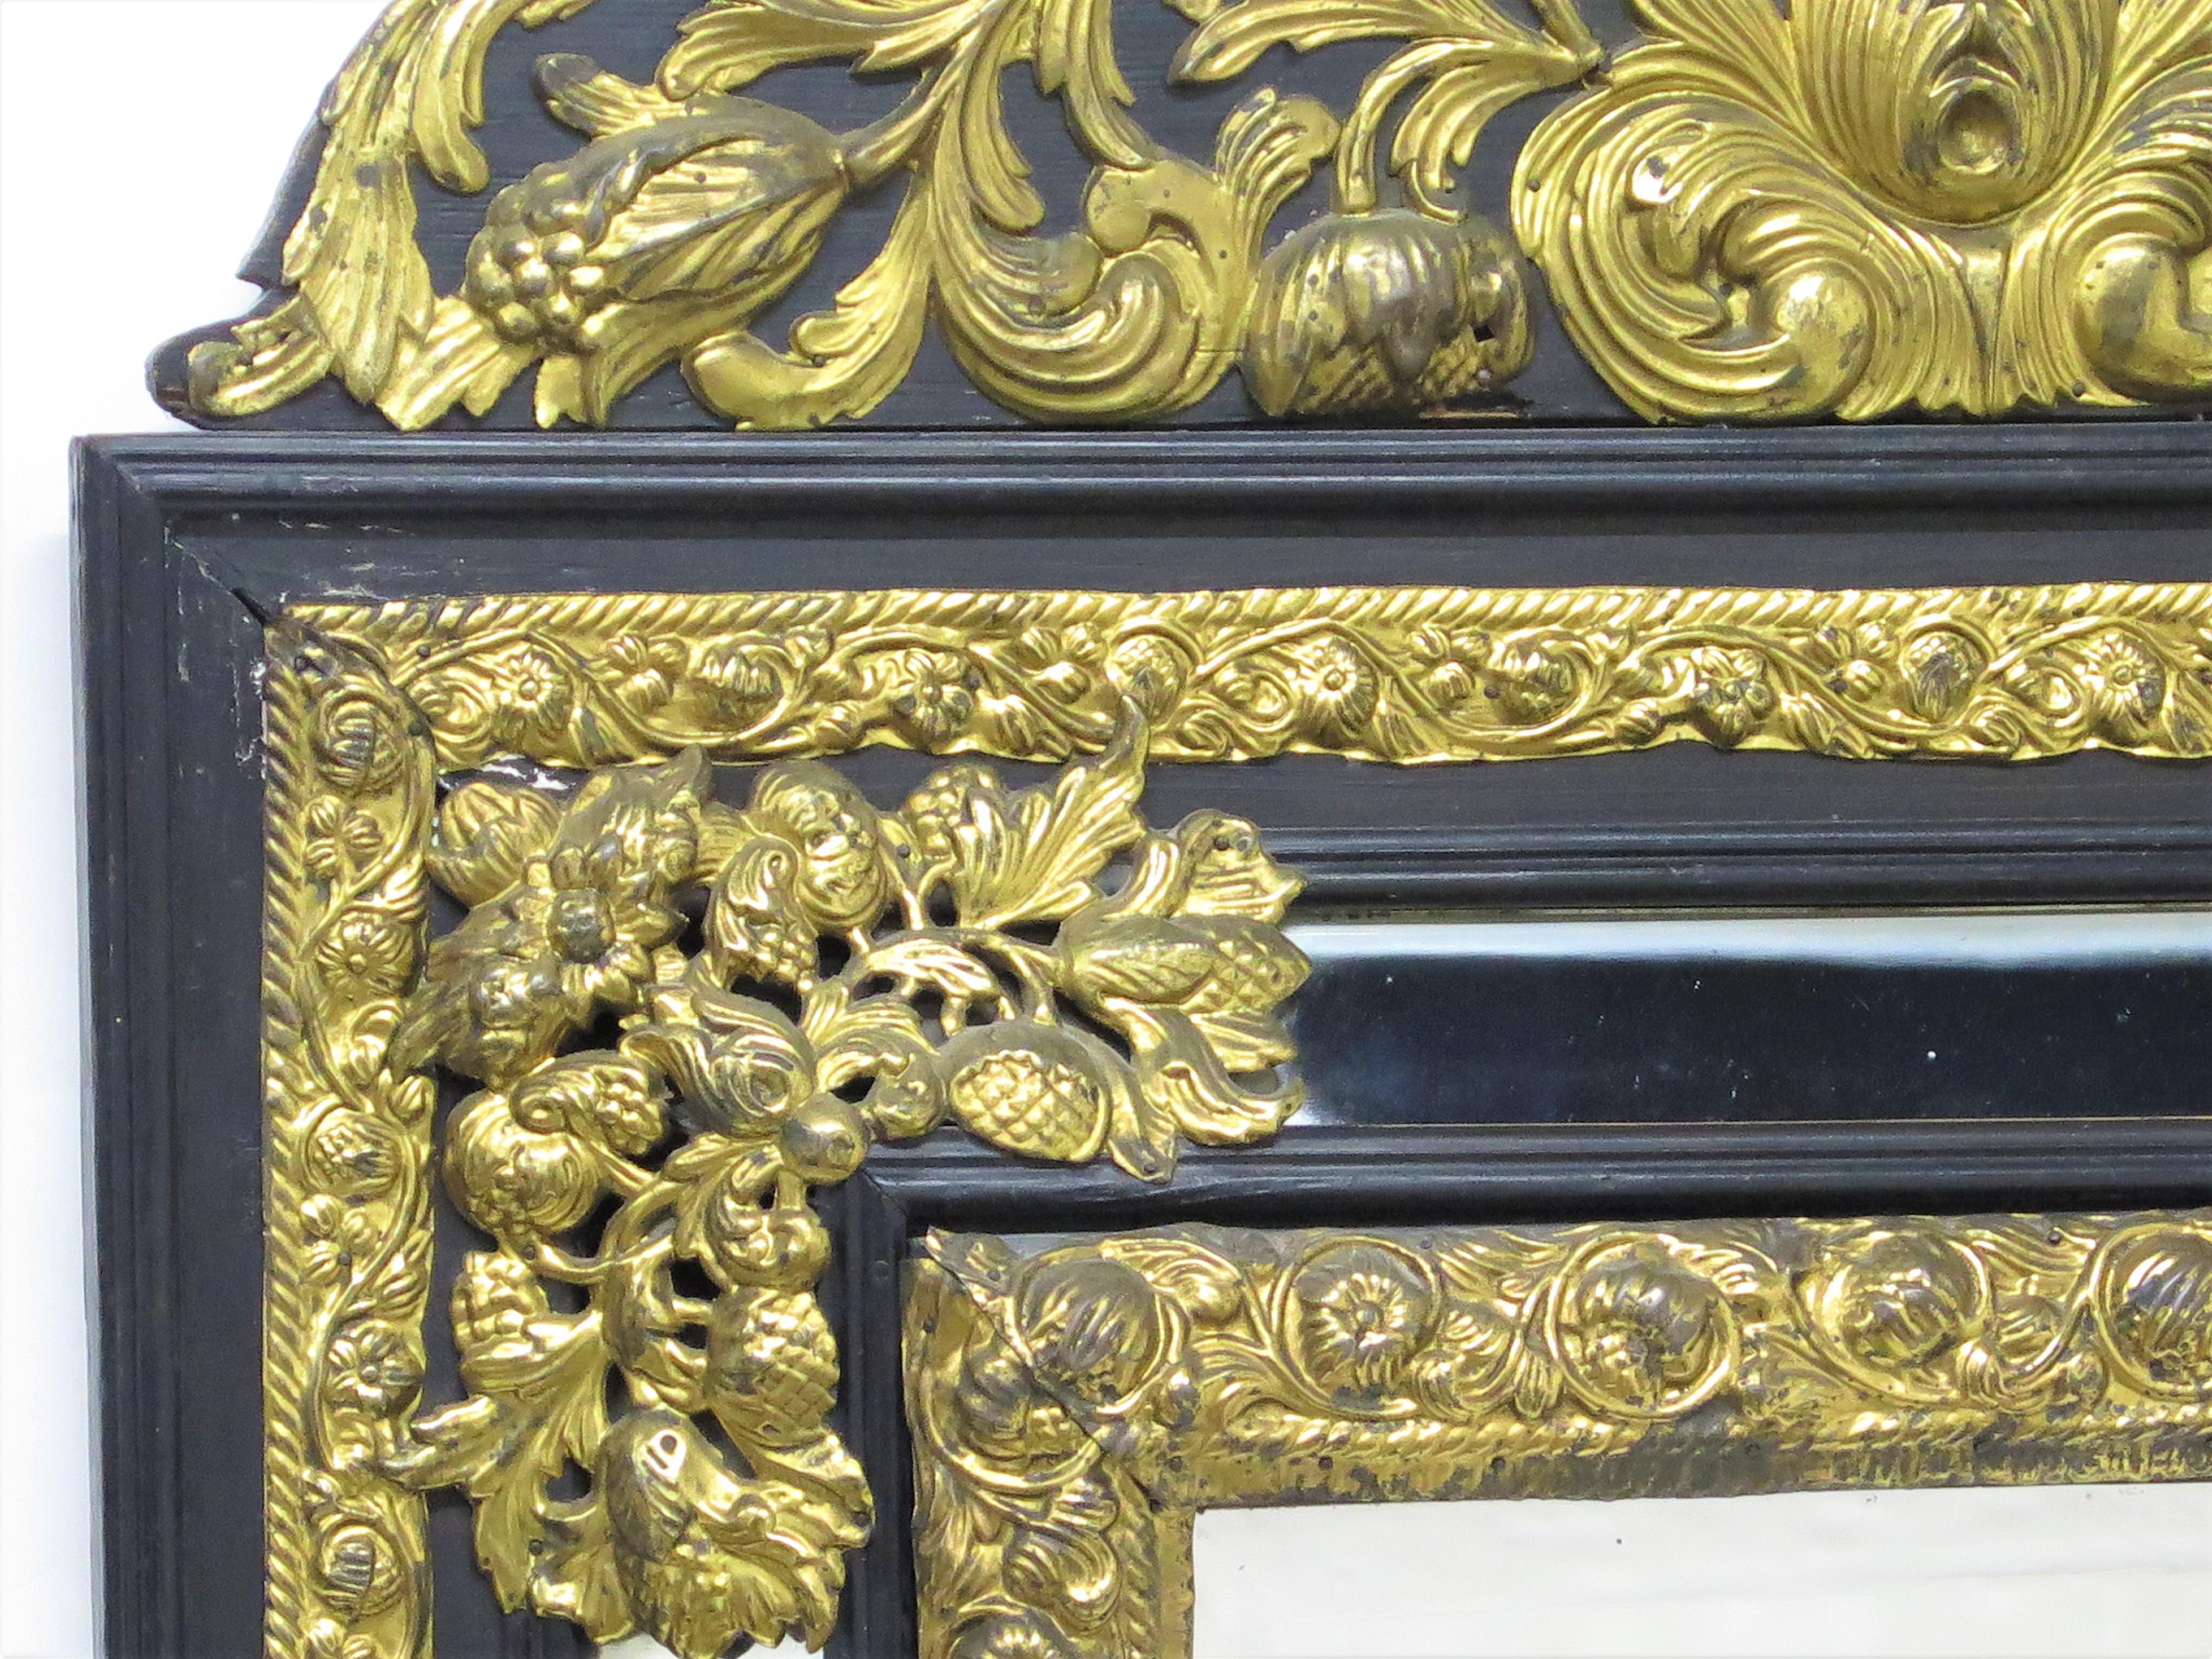 Dutch Looking Glass of Ebony and Brass Repoussé In Good Condition For Sale In Dallas, TX